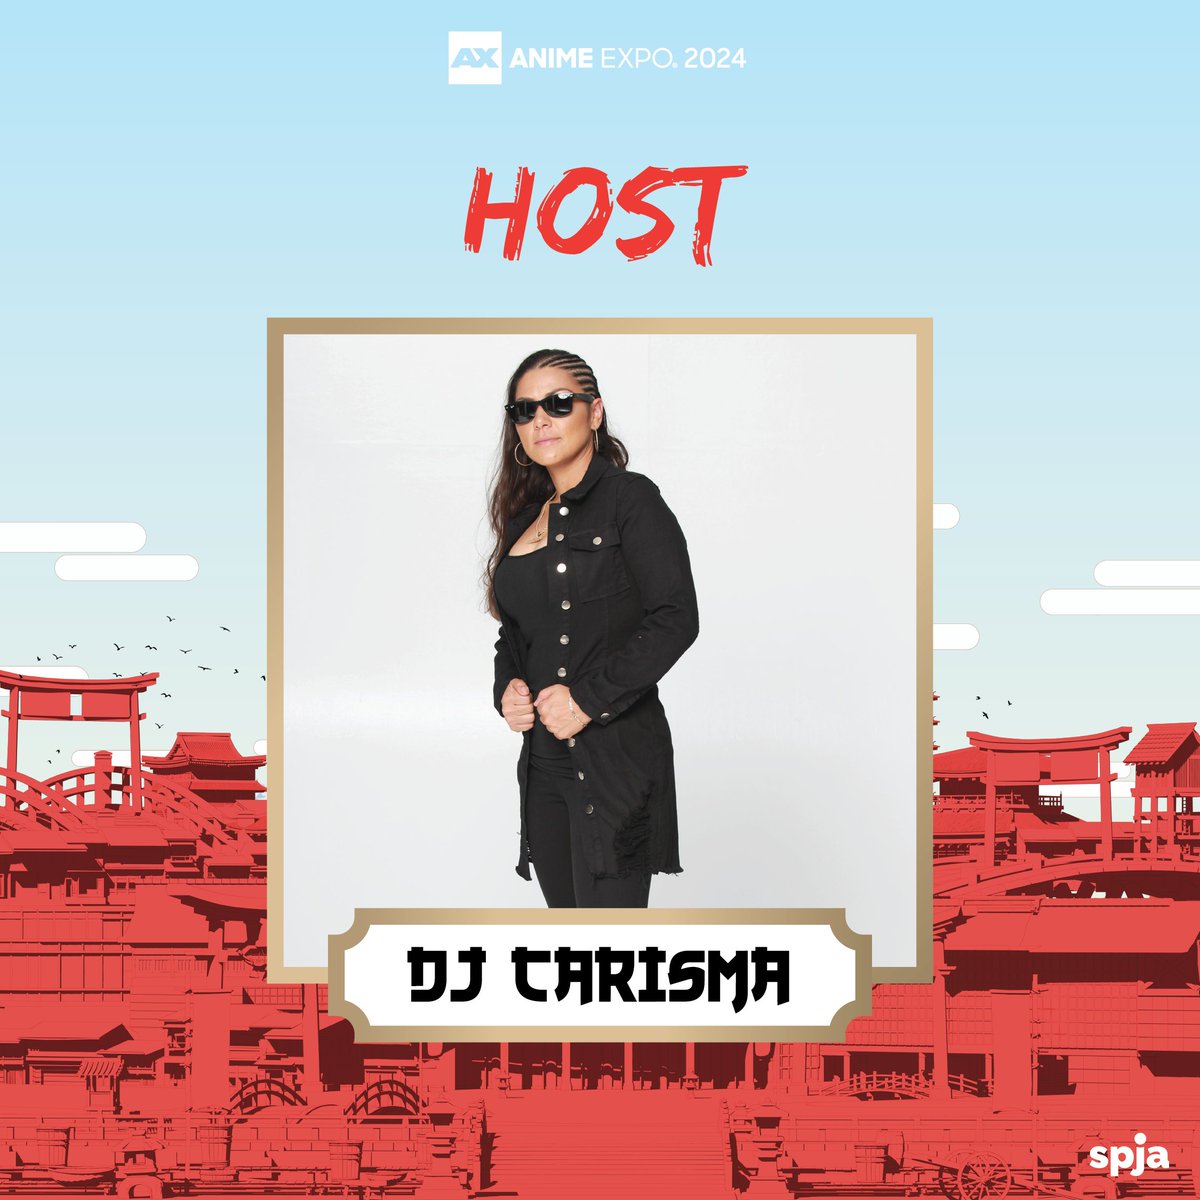 📣 Announcing DJ Carisma as a Host for #AX2024! As a 3-time Female DJ of the Year winner, DJ Carisma brings unparalleled talent and energy to the AX Lite stage and more!🎶 DJ Carisma hosts radio shows on Power106 and SiriusXM, and is the Official DJ for the LA Rams!🎧@DjCarisma